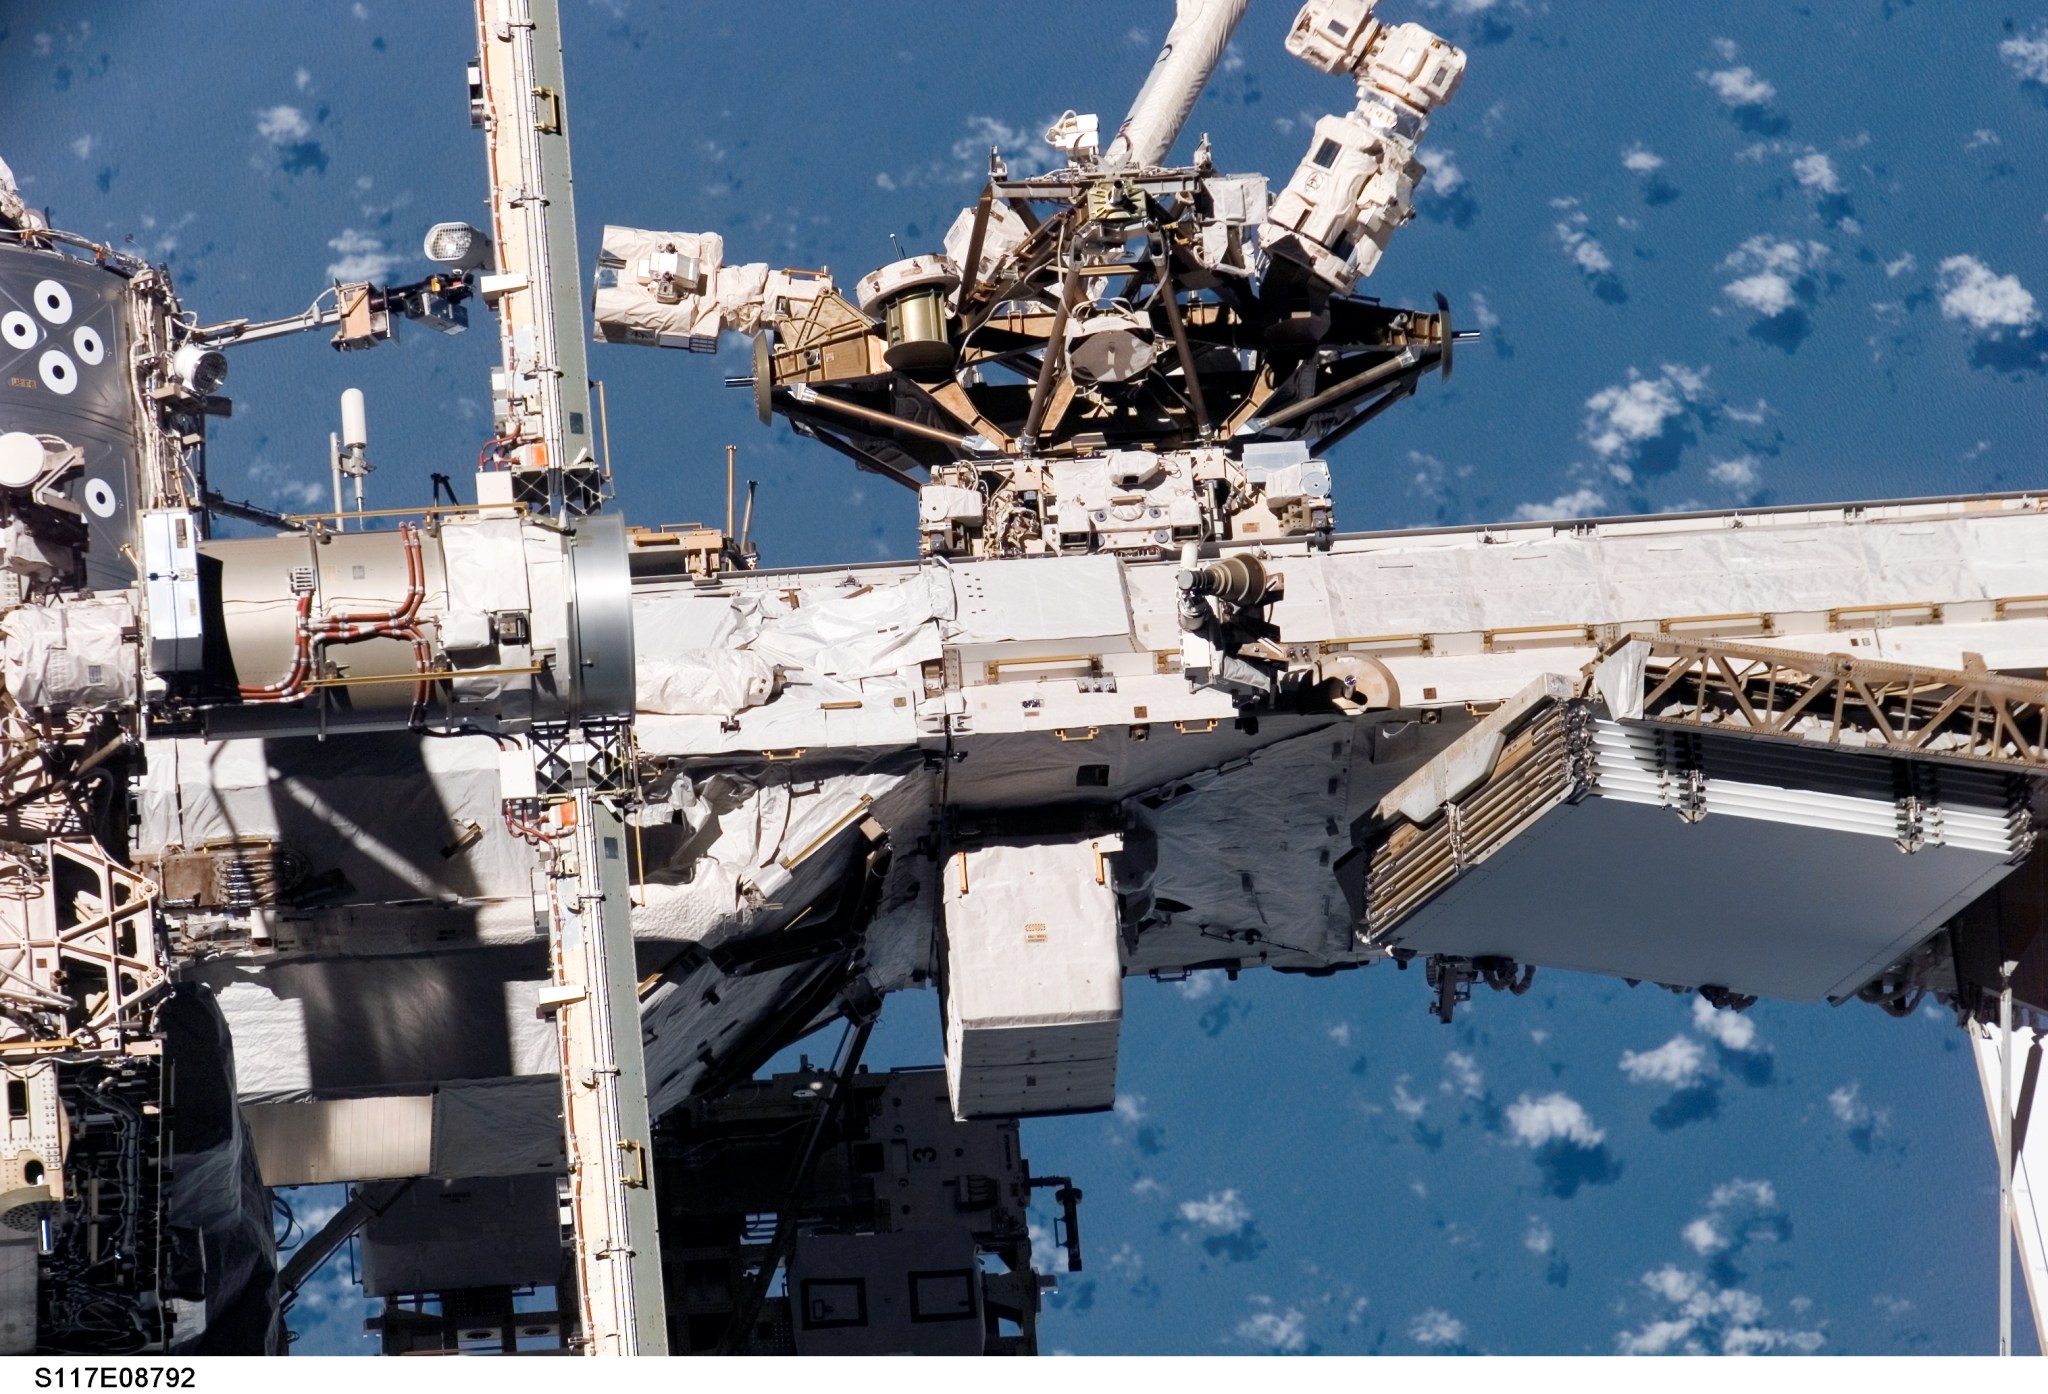 Exterior view of portion of ISS, with several white and silver technical components, with blue-hued Earth in background